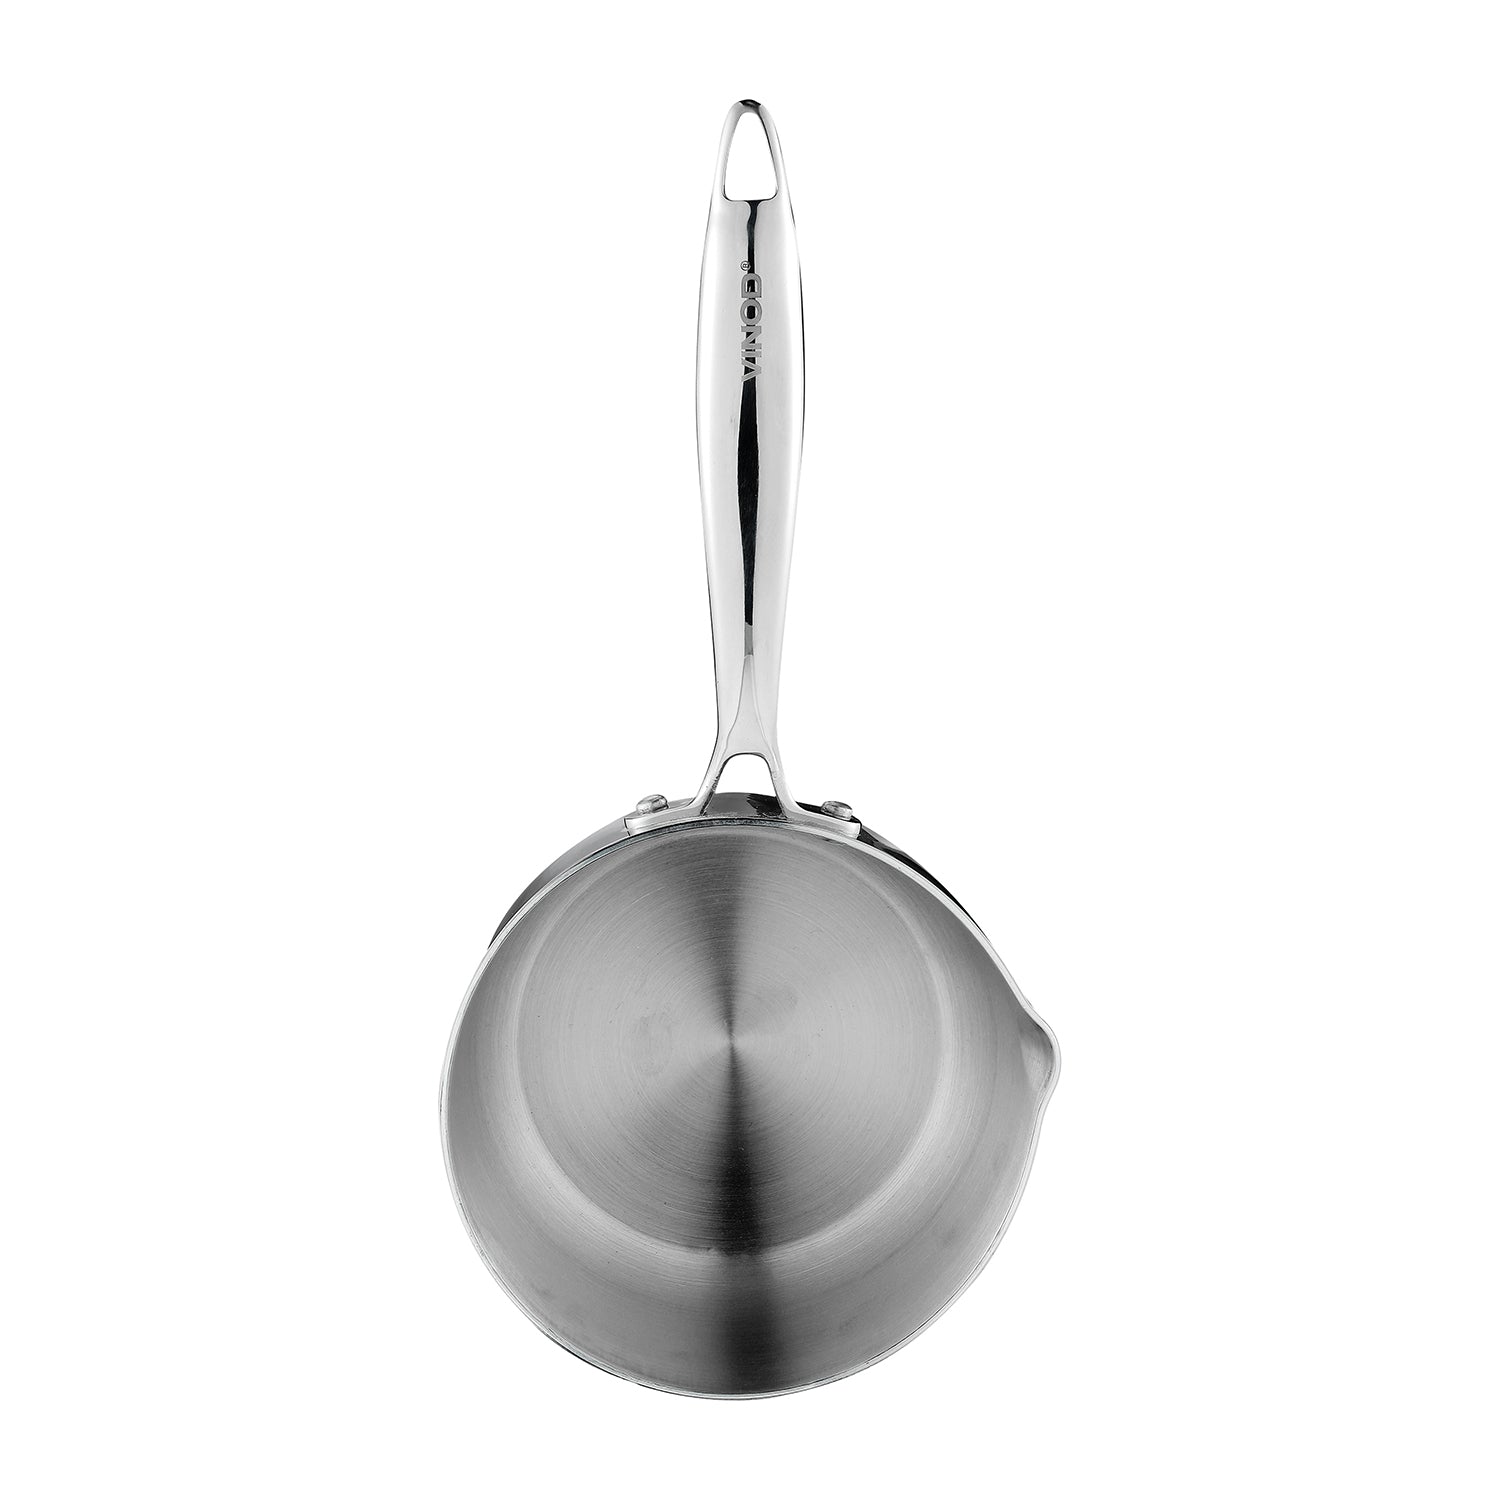 AISI 430 Stainless Steel Induction Base of Triply Milkpanty